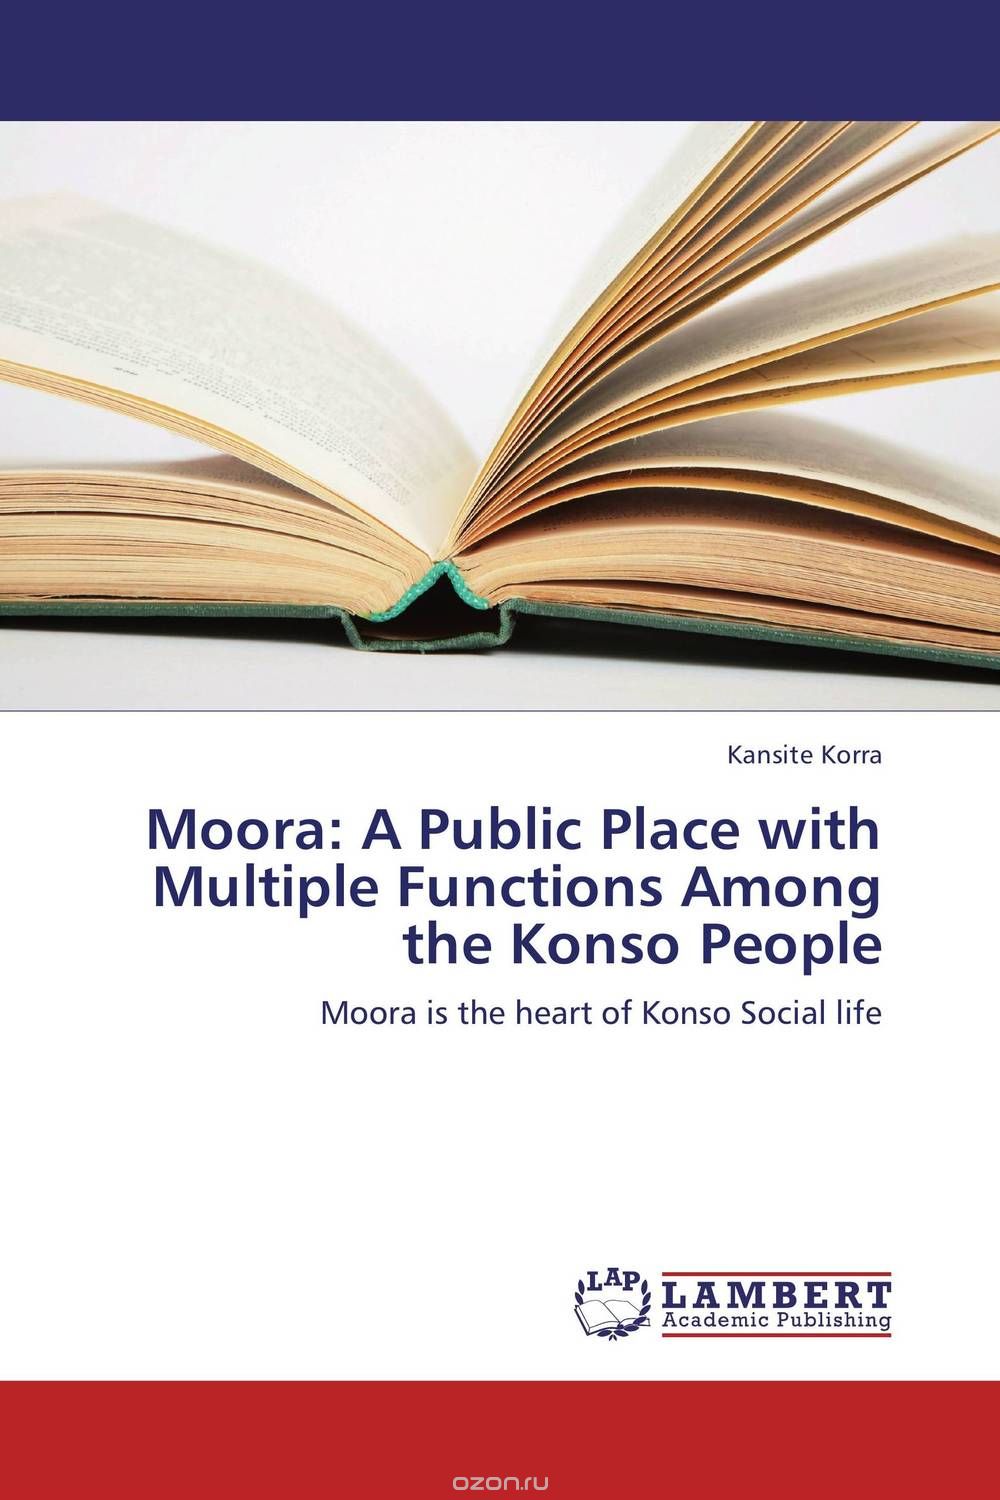 Скачать книгу "Moora: A Public Place with Multiple Functions Among the Konso People"